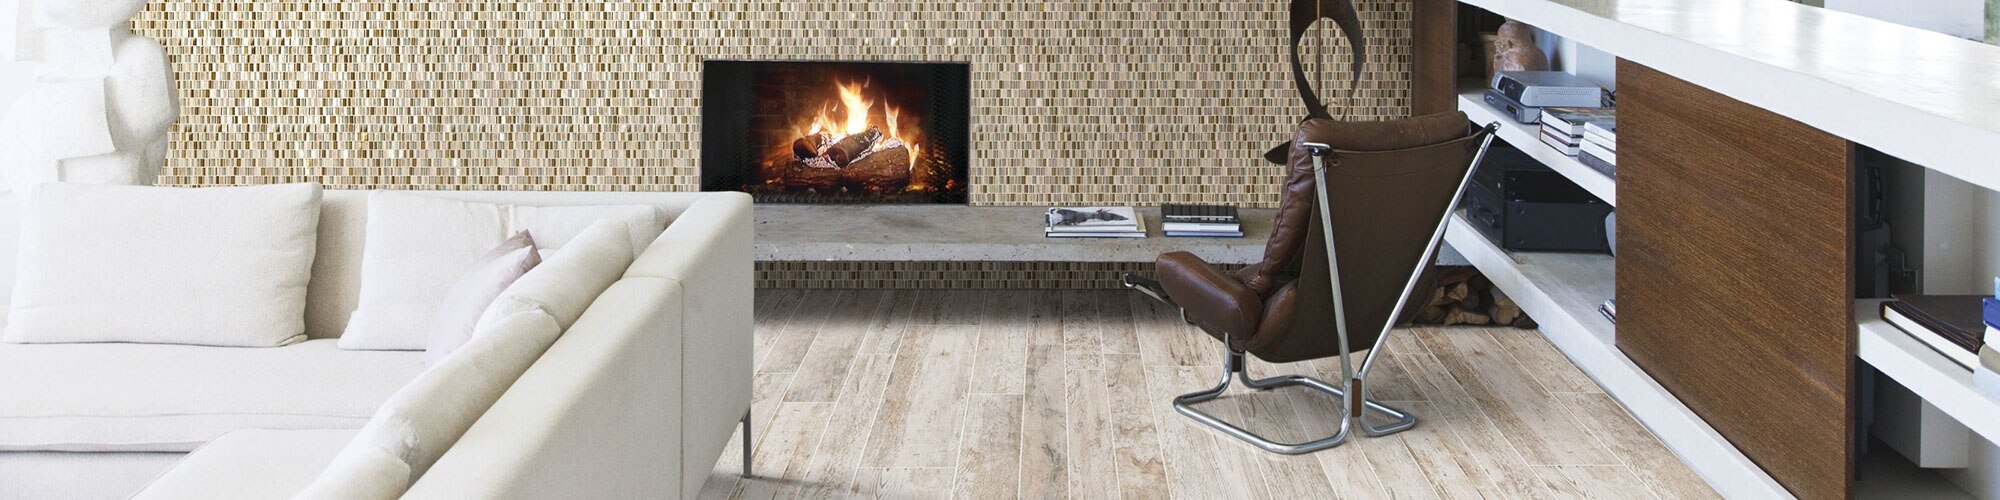 Modern living room with feature wall of neutral color glass mosaic wall tile, fireplace with floating hearth, brown leather & silver metal chair.